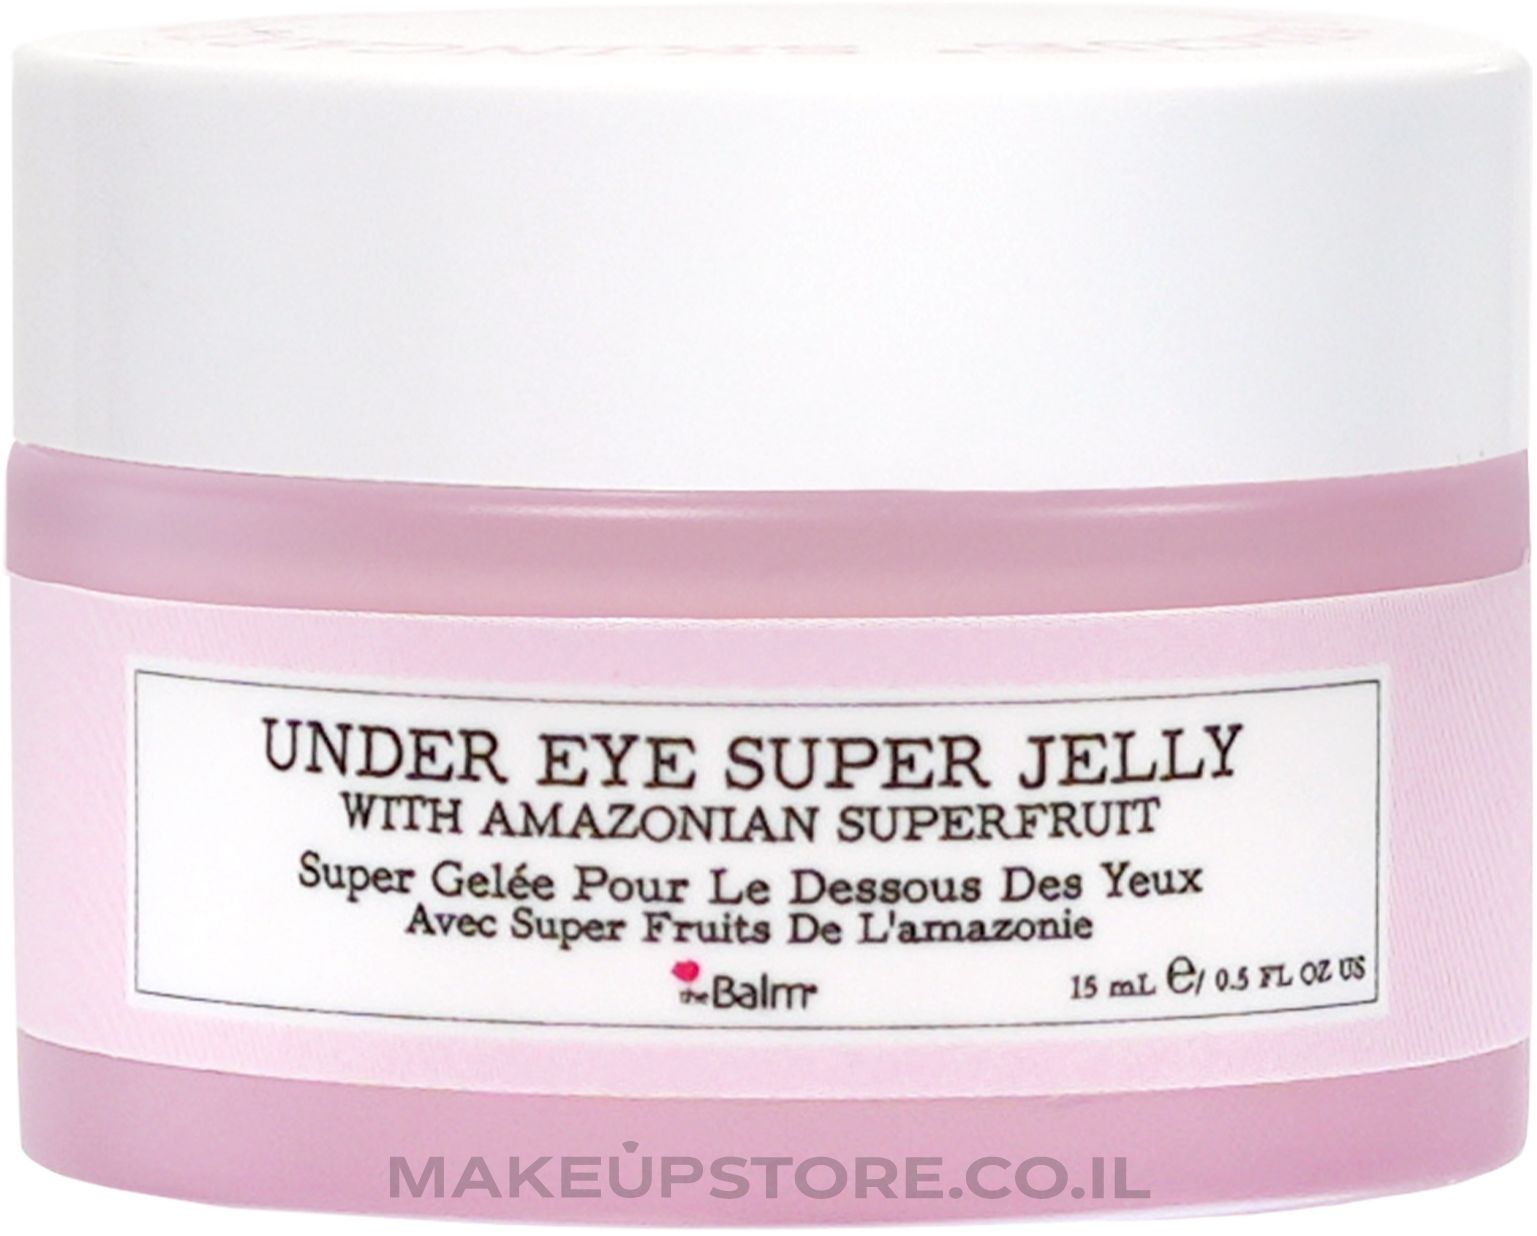 THEBALM TO THE RESCUE UNDER EYE SUPER JELLY 15ML